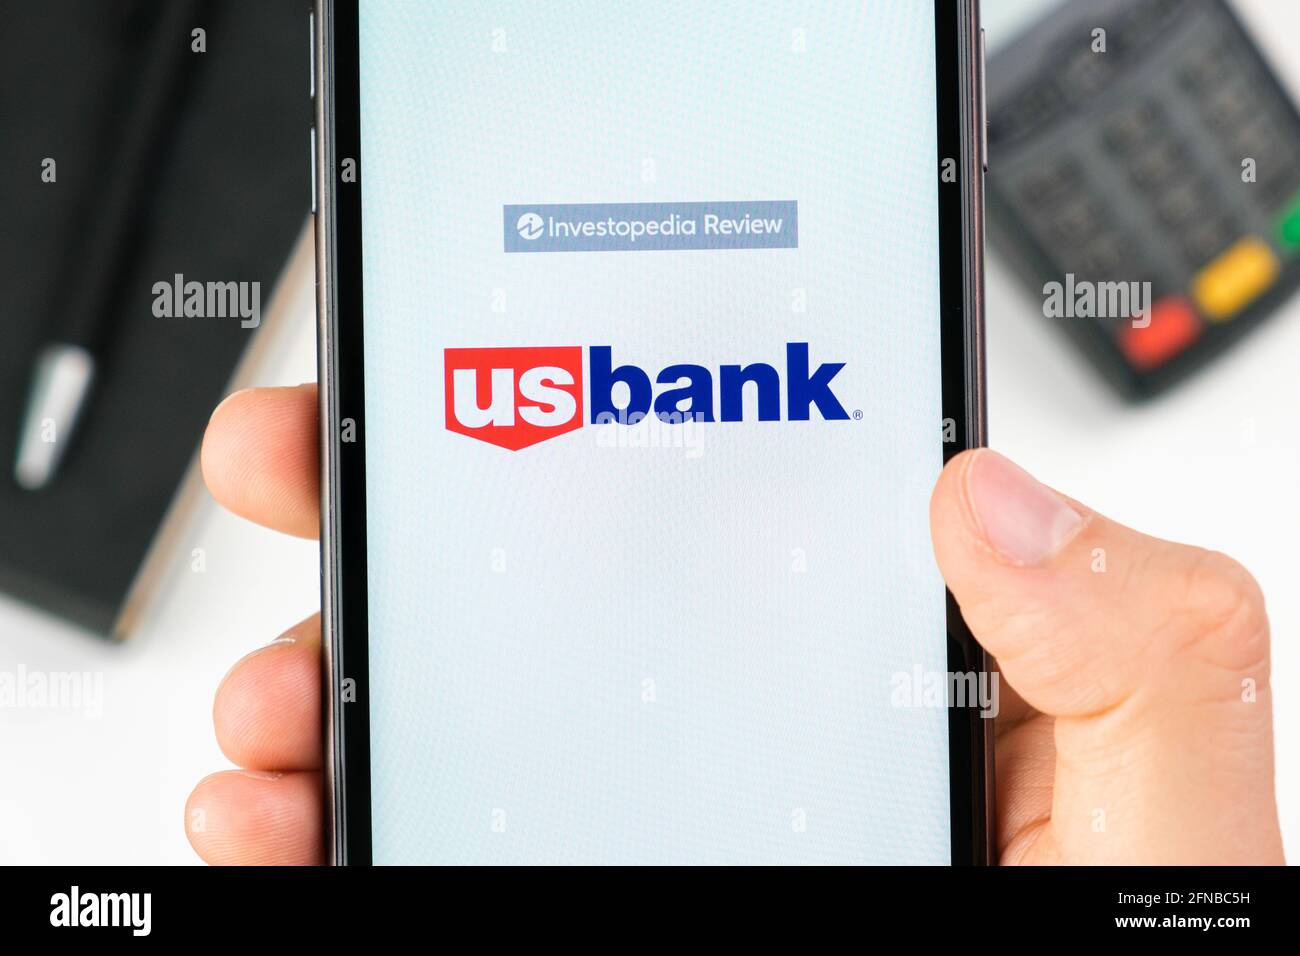 US bank logo on the smartphone screen in mans hand on the background of payment terminal, May 2021, San Francisco, USA Stock Photo